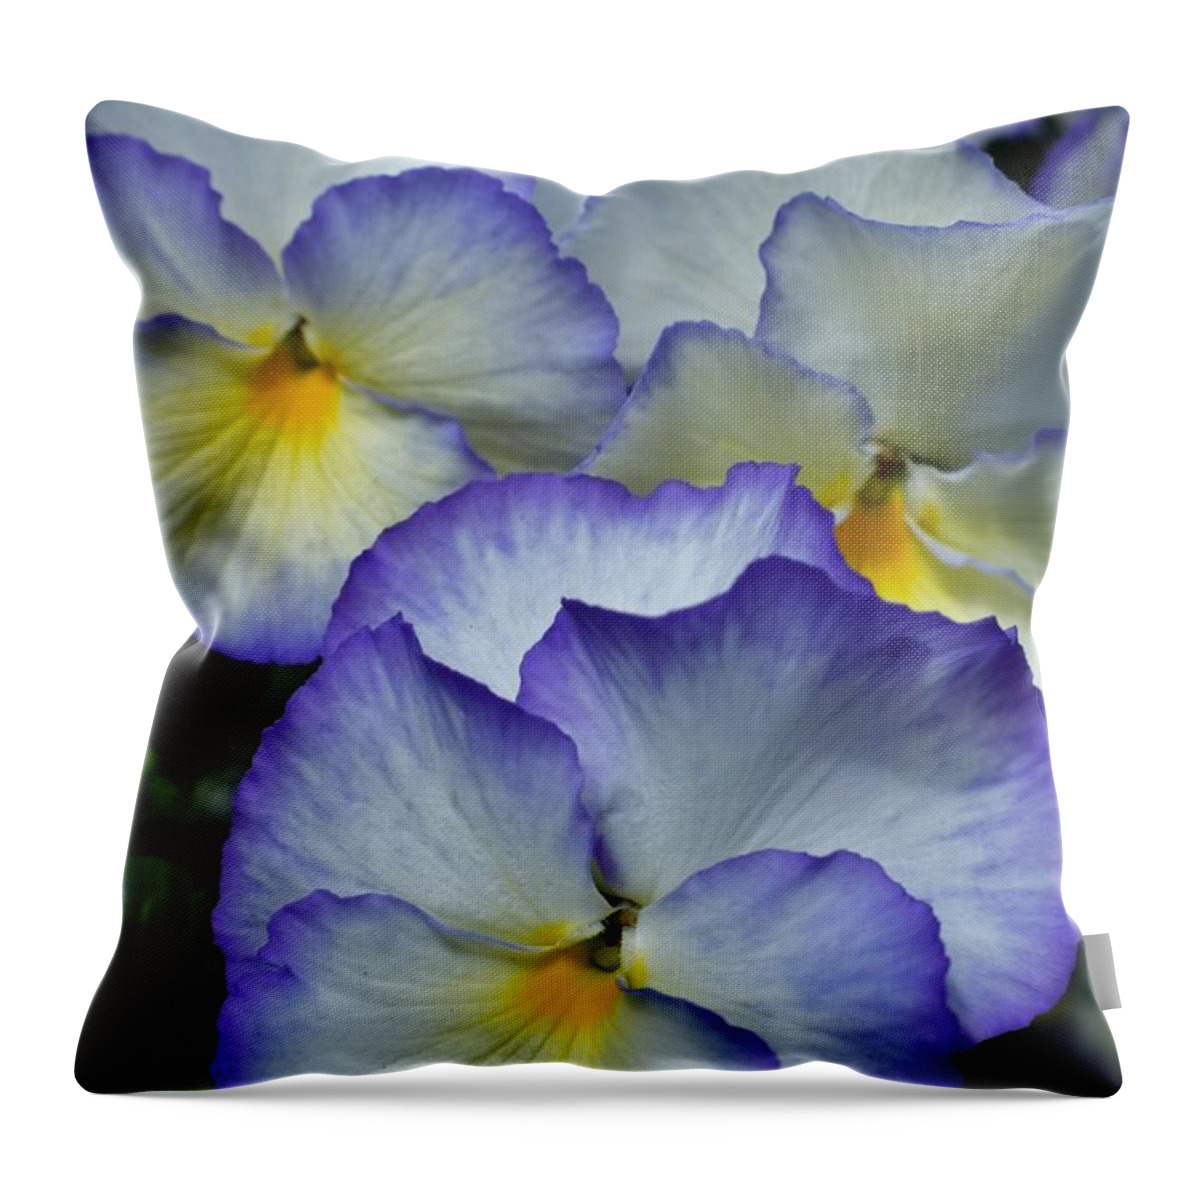 Pansies Throw Pillow featuring the photograph Pansies by Jimmy Chuck Smith